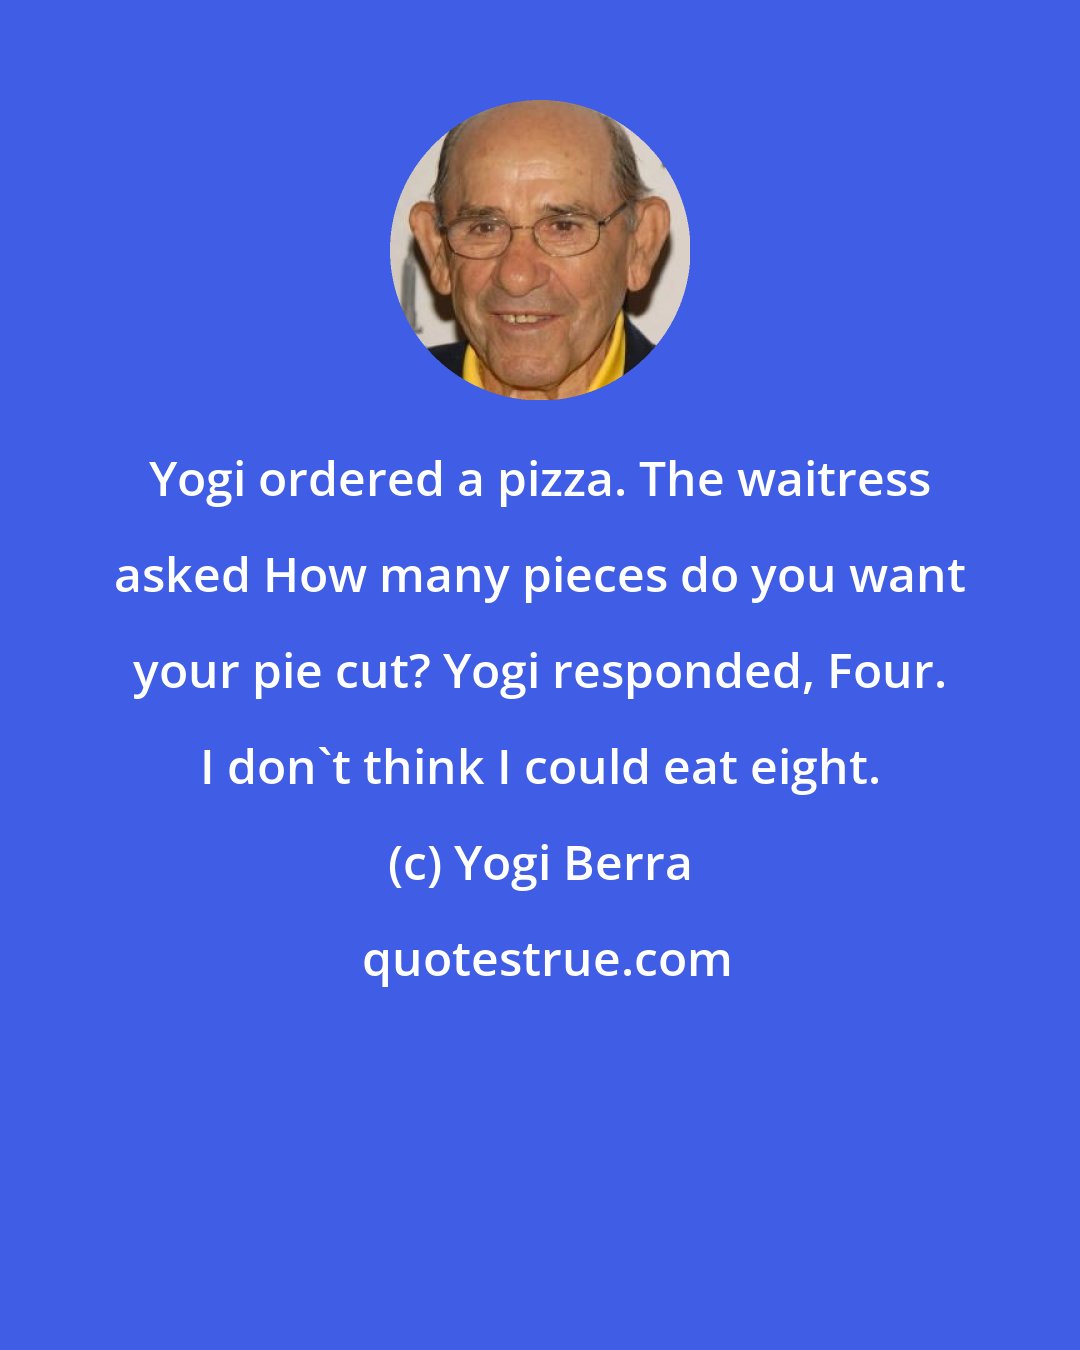 Yogi Berra: Yogi ordered a pizza. The waitress asked How many pieces do you want your pie cut? Yogi responded, Four. I don't think I could eat eight.